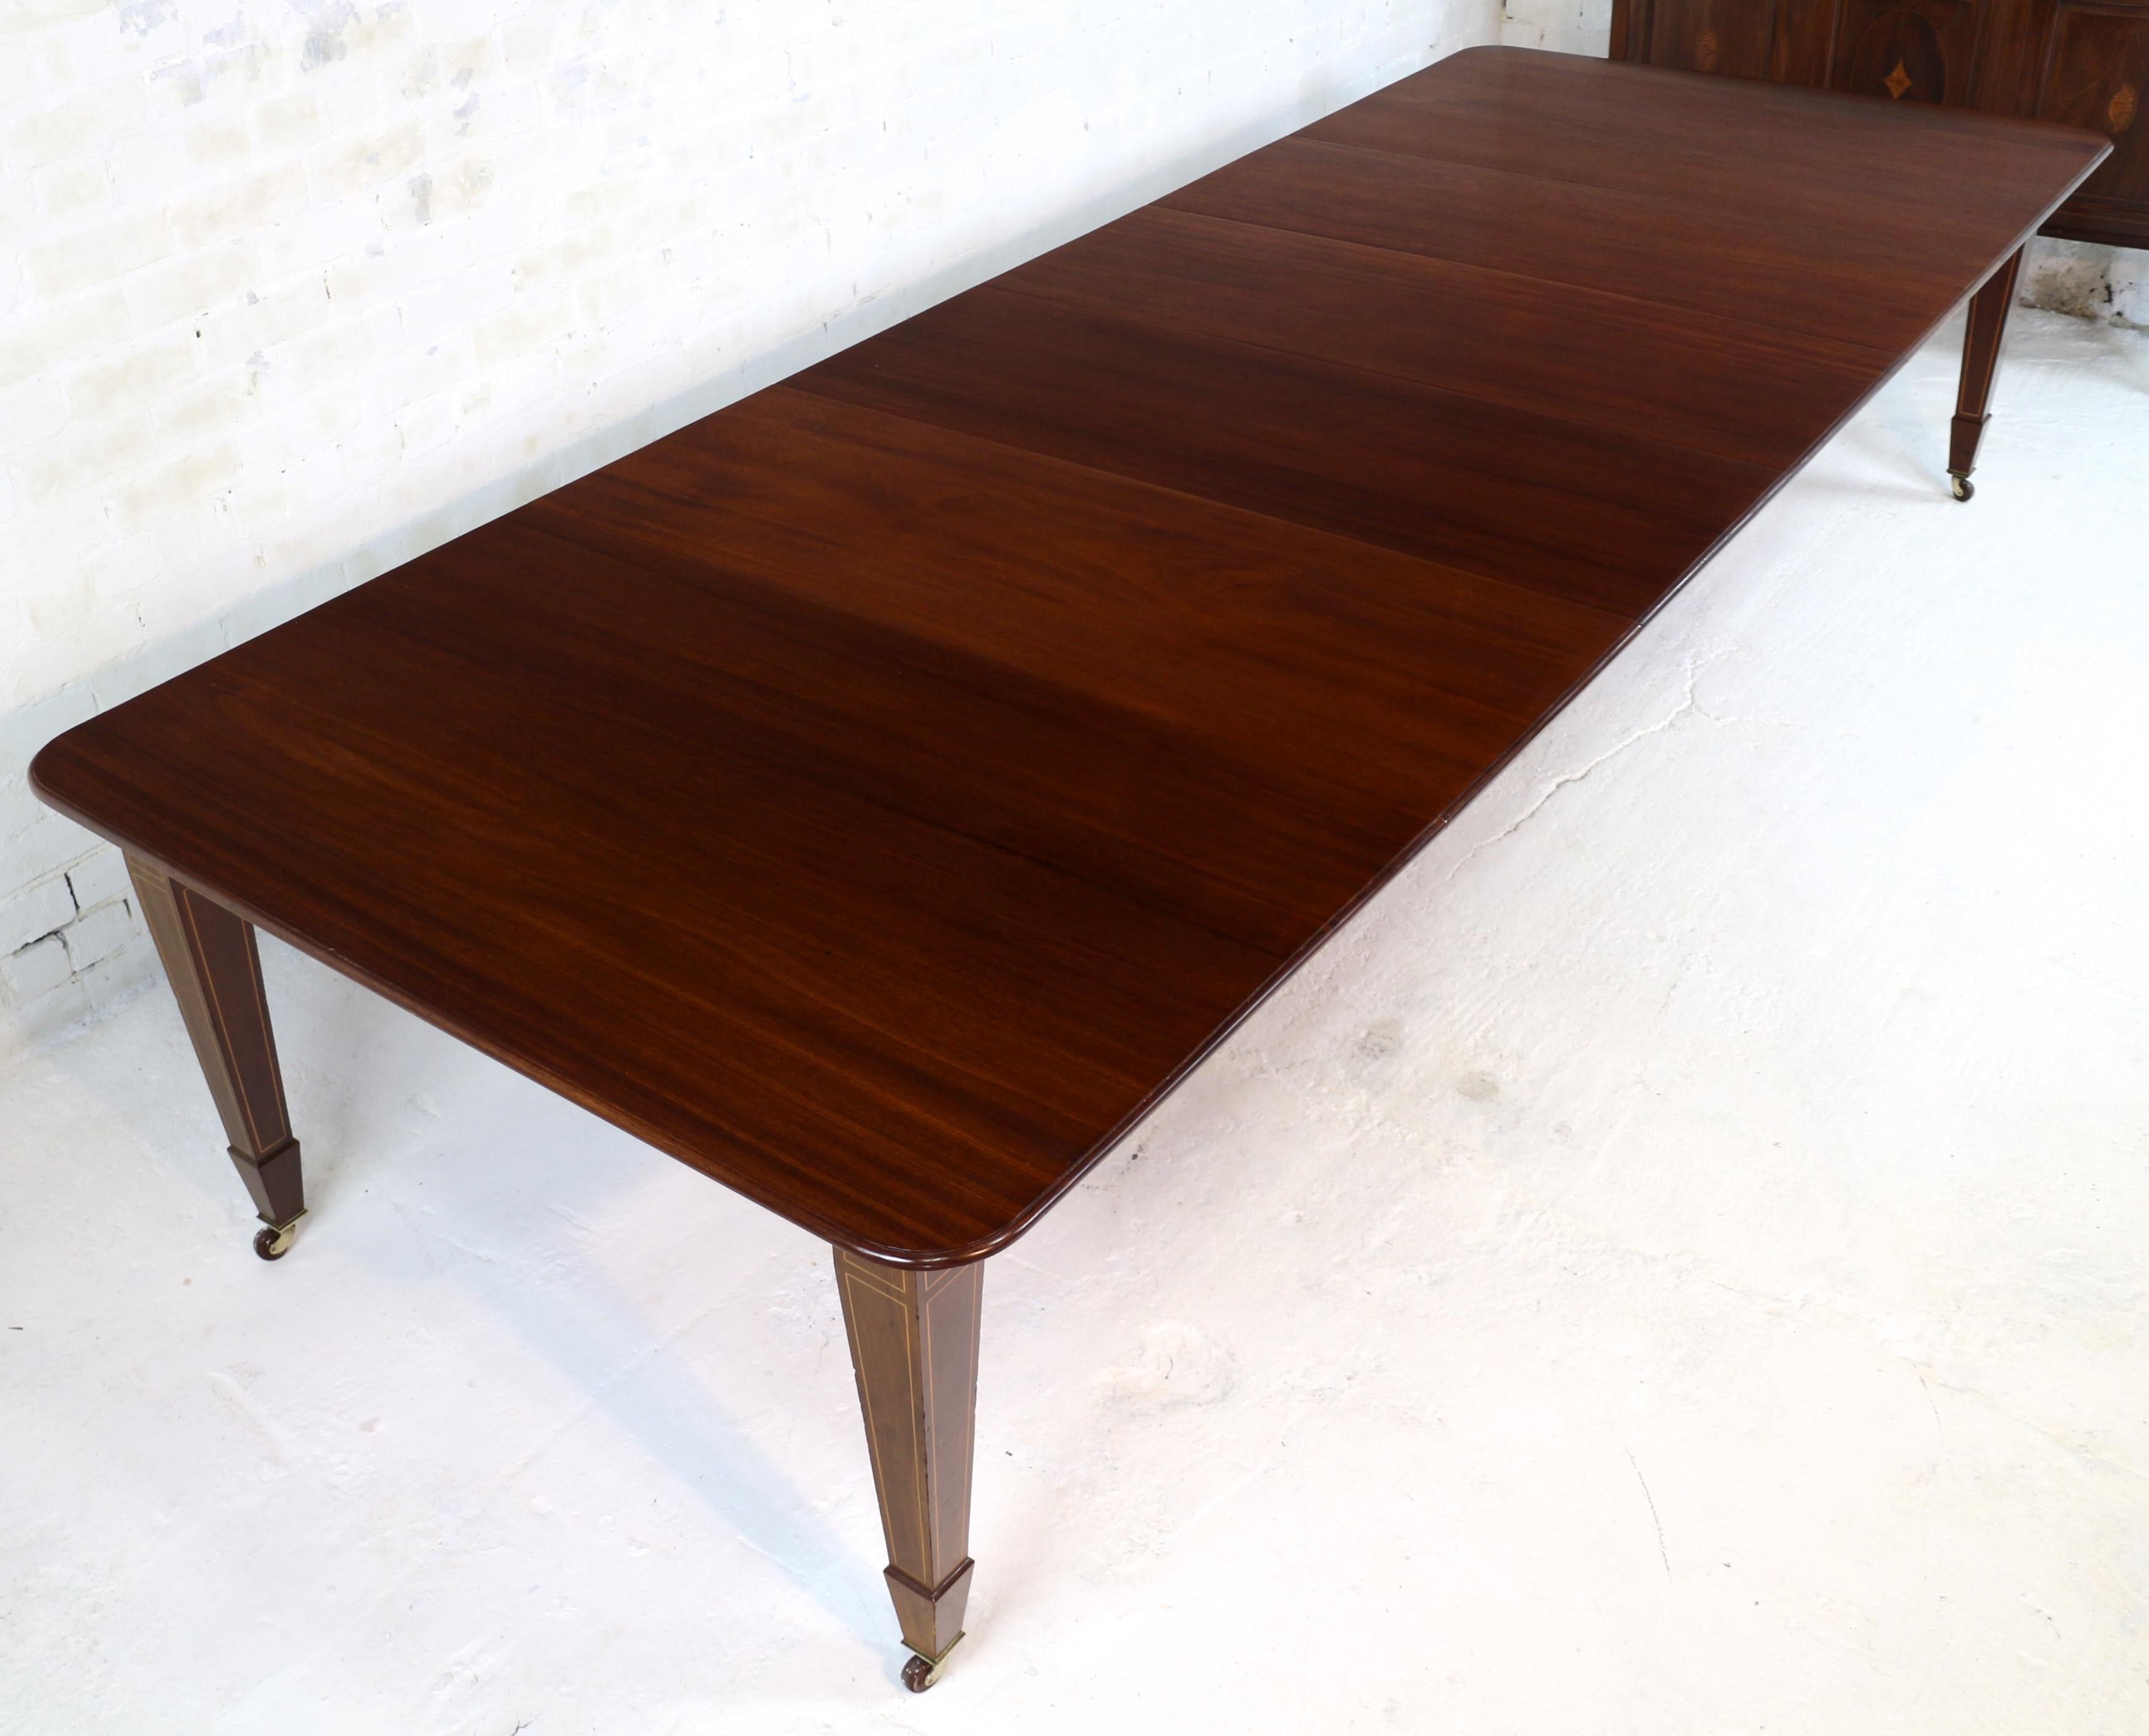 A super late Victorian/Edwardian Scottish 12ft wind-out mahogany and inlaid Sheraton style extending dining table and leaf holder by James Garvie & Sons of Aberdeen. The dining table with rounded rectangular top with a moulded edge and standing on